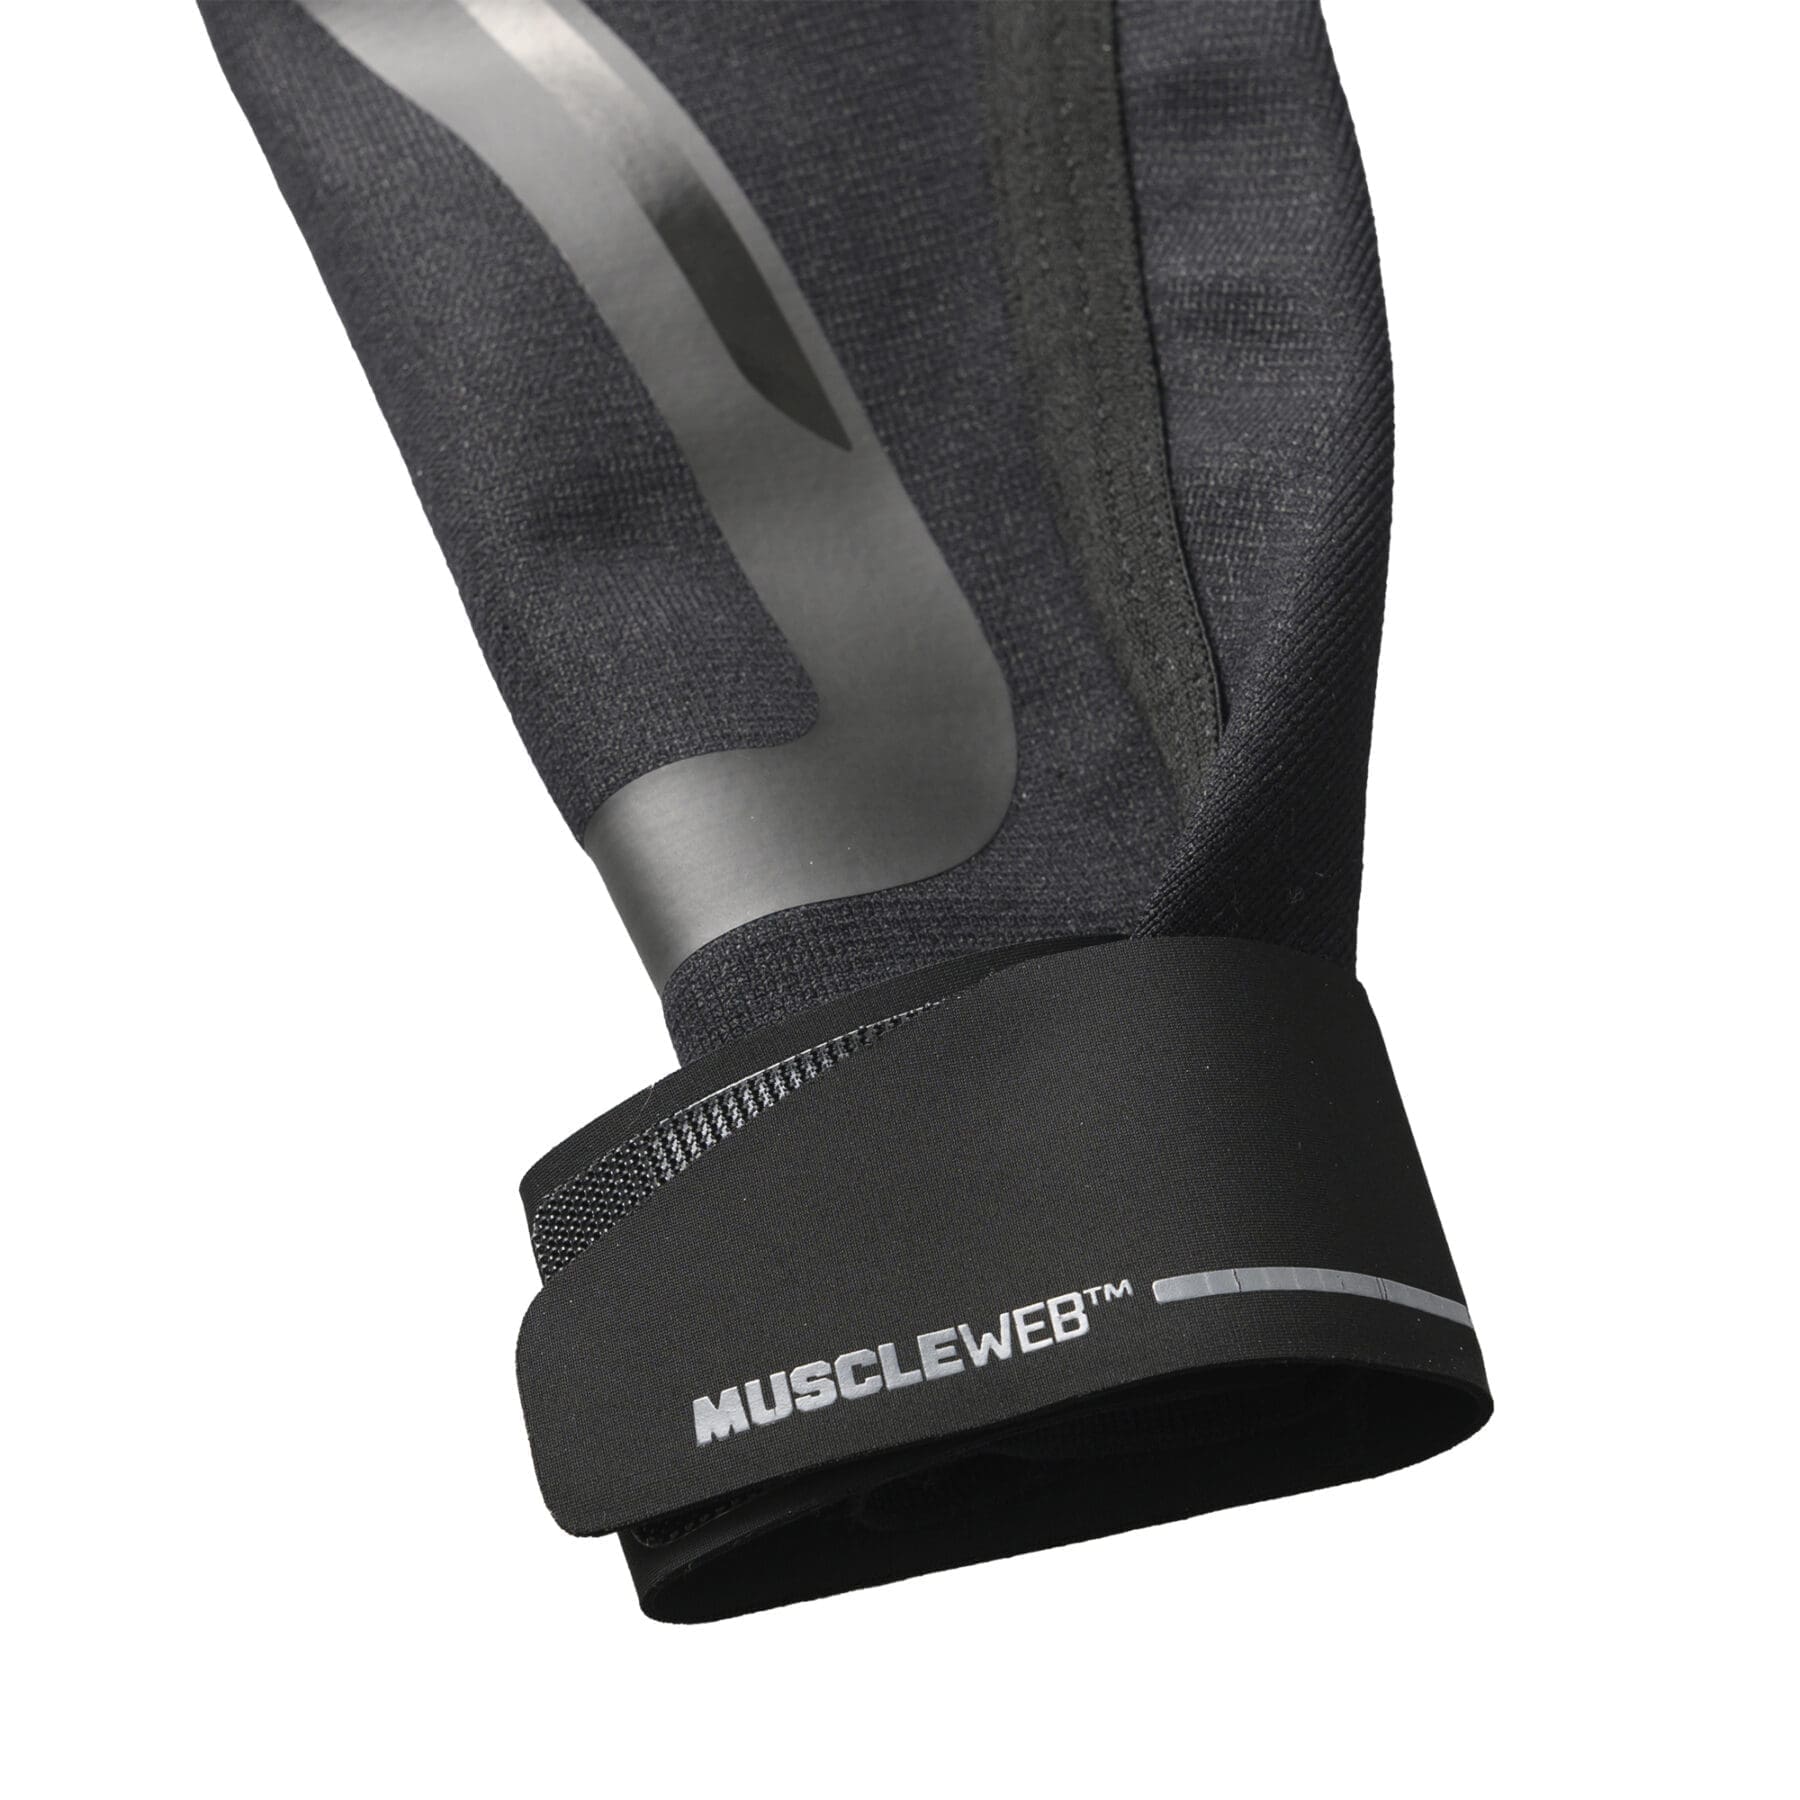 Optimal Support: The Best Arm Brace for Tennis Elbow and Forearm